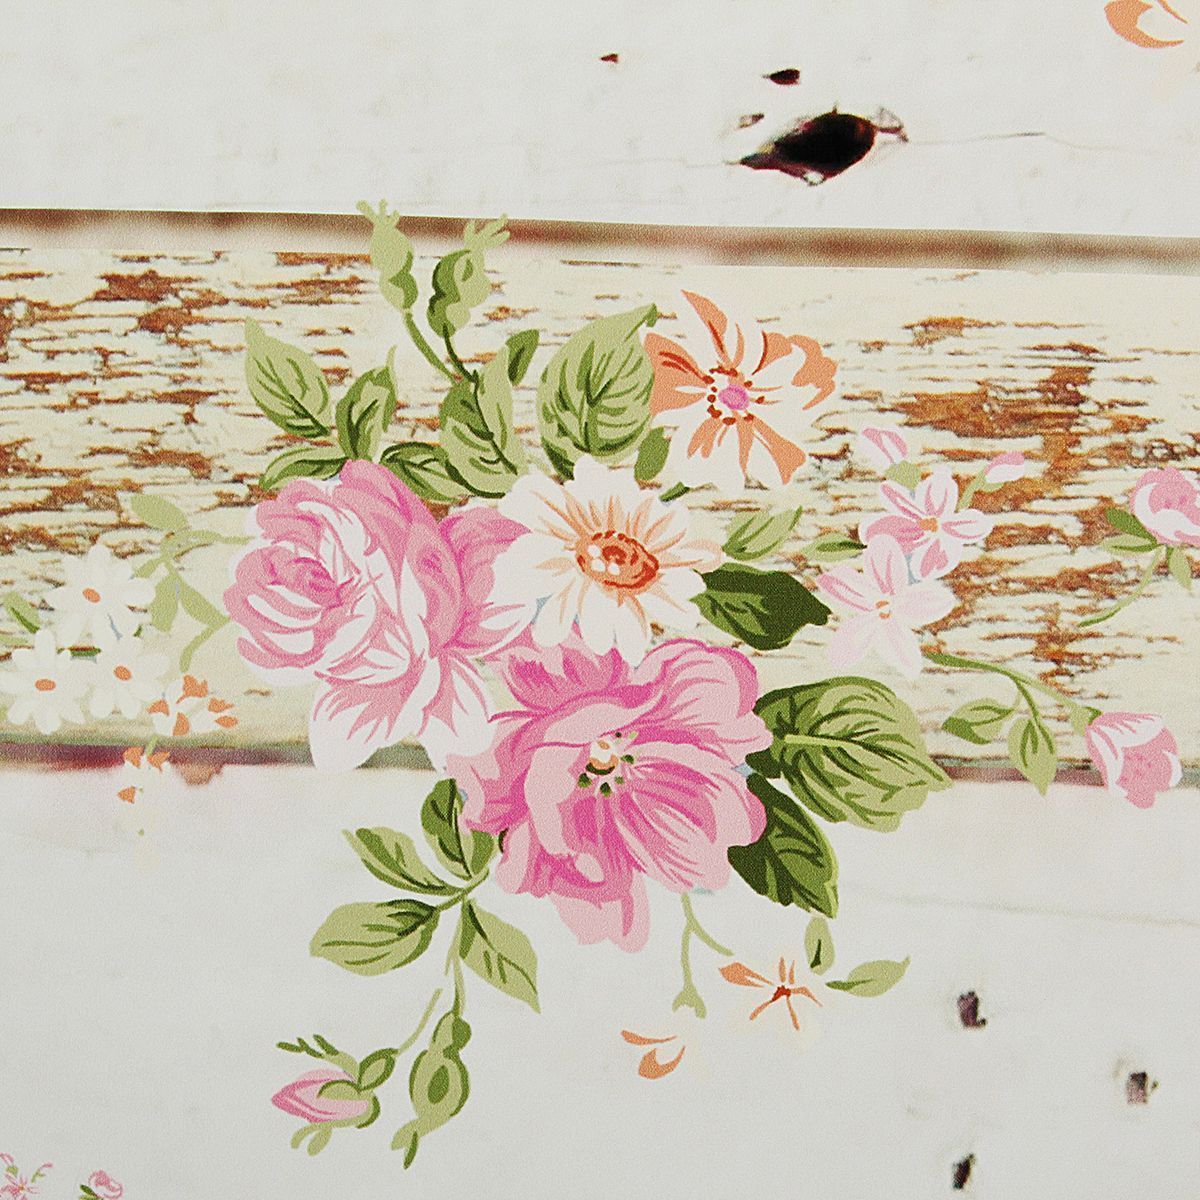 5x7FT-Vintage-Pink-Flowers-Wooden-Floor-Wall-Photo-Studio-Background-Backdrop-Cloth-1116099